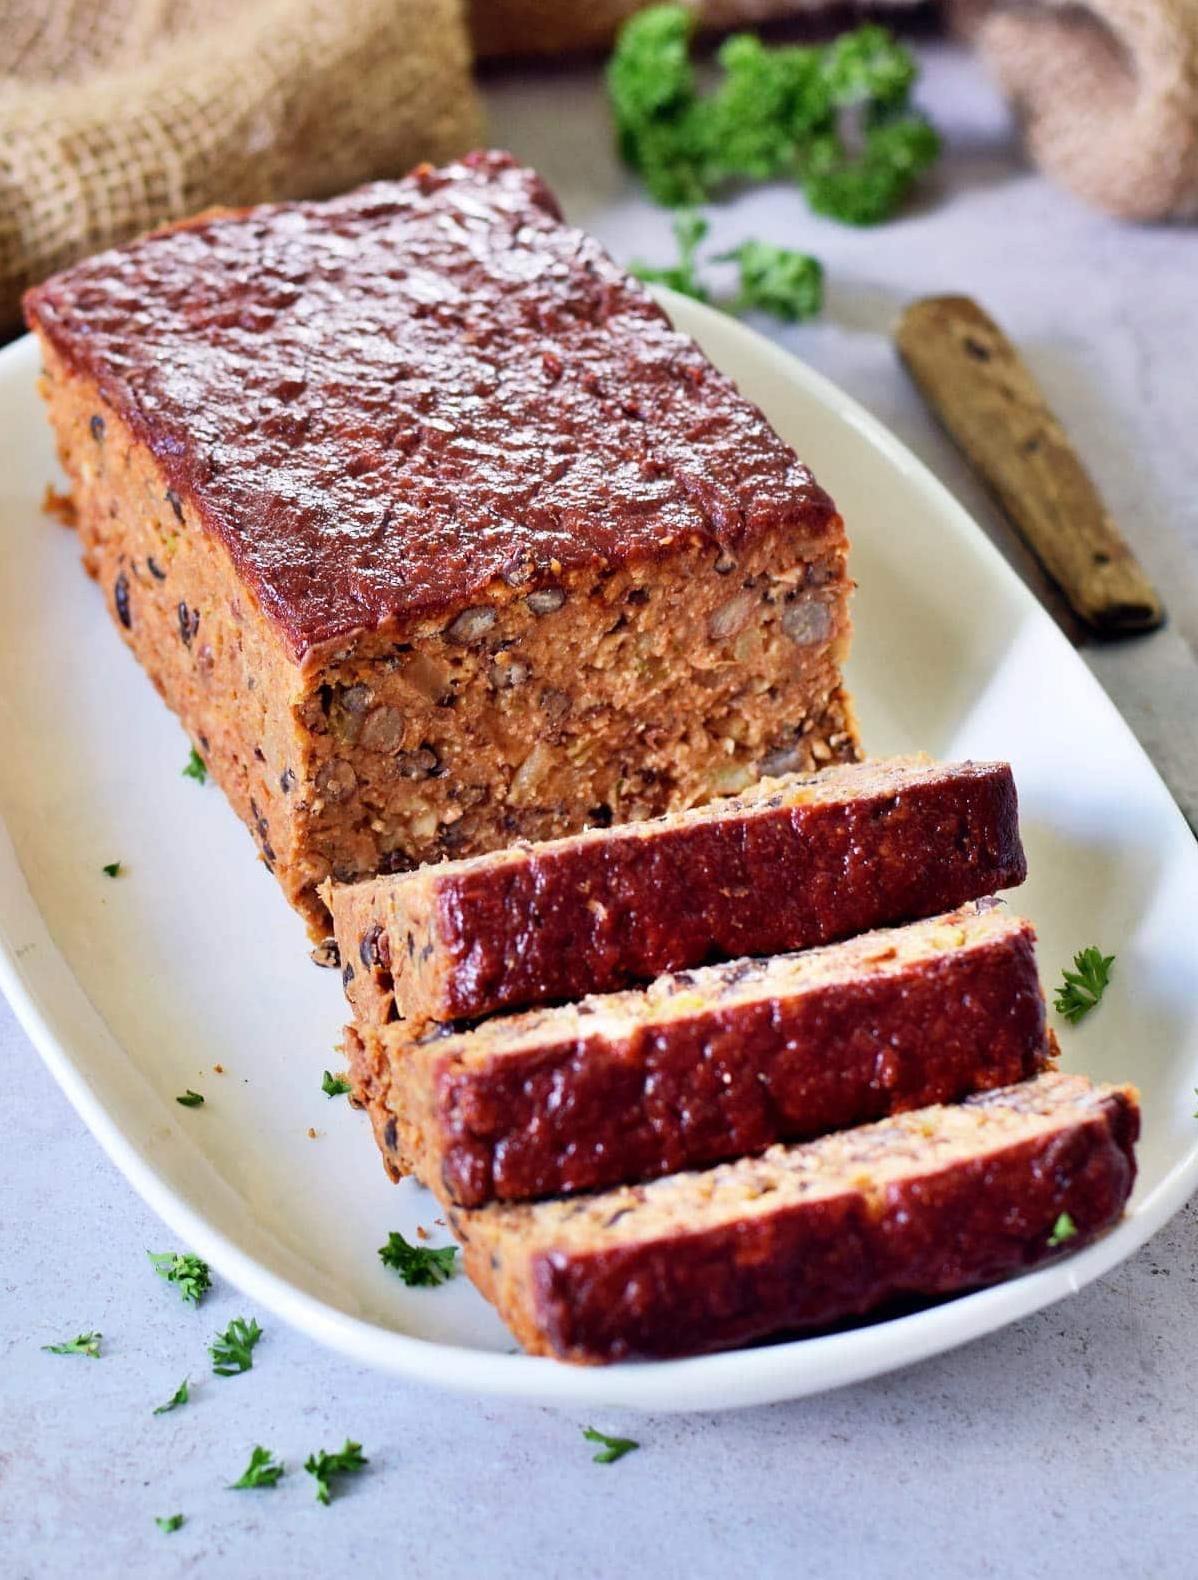 Healthy and Delicious Gluten-Free Vegetarian Meatloaf Recipe